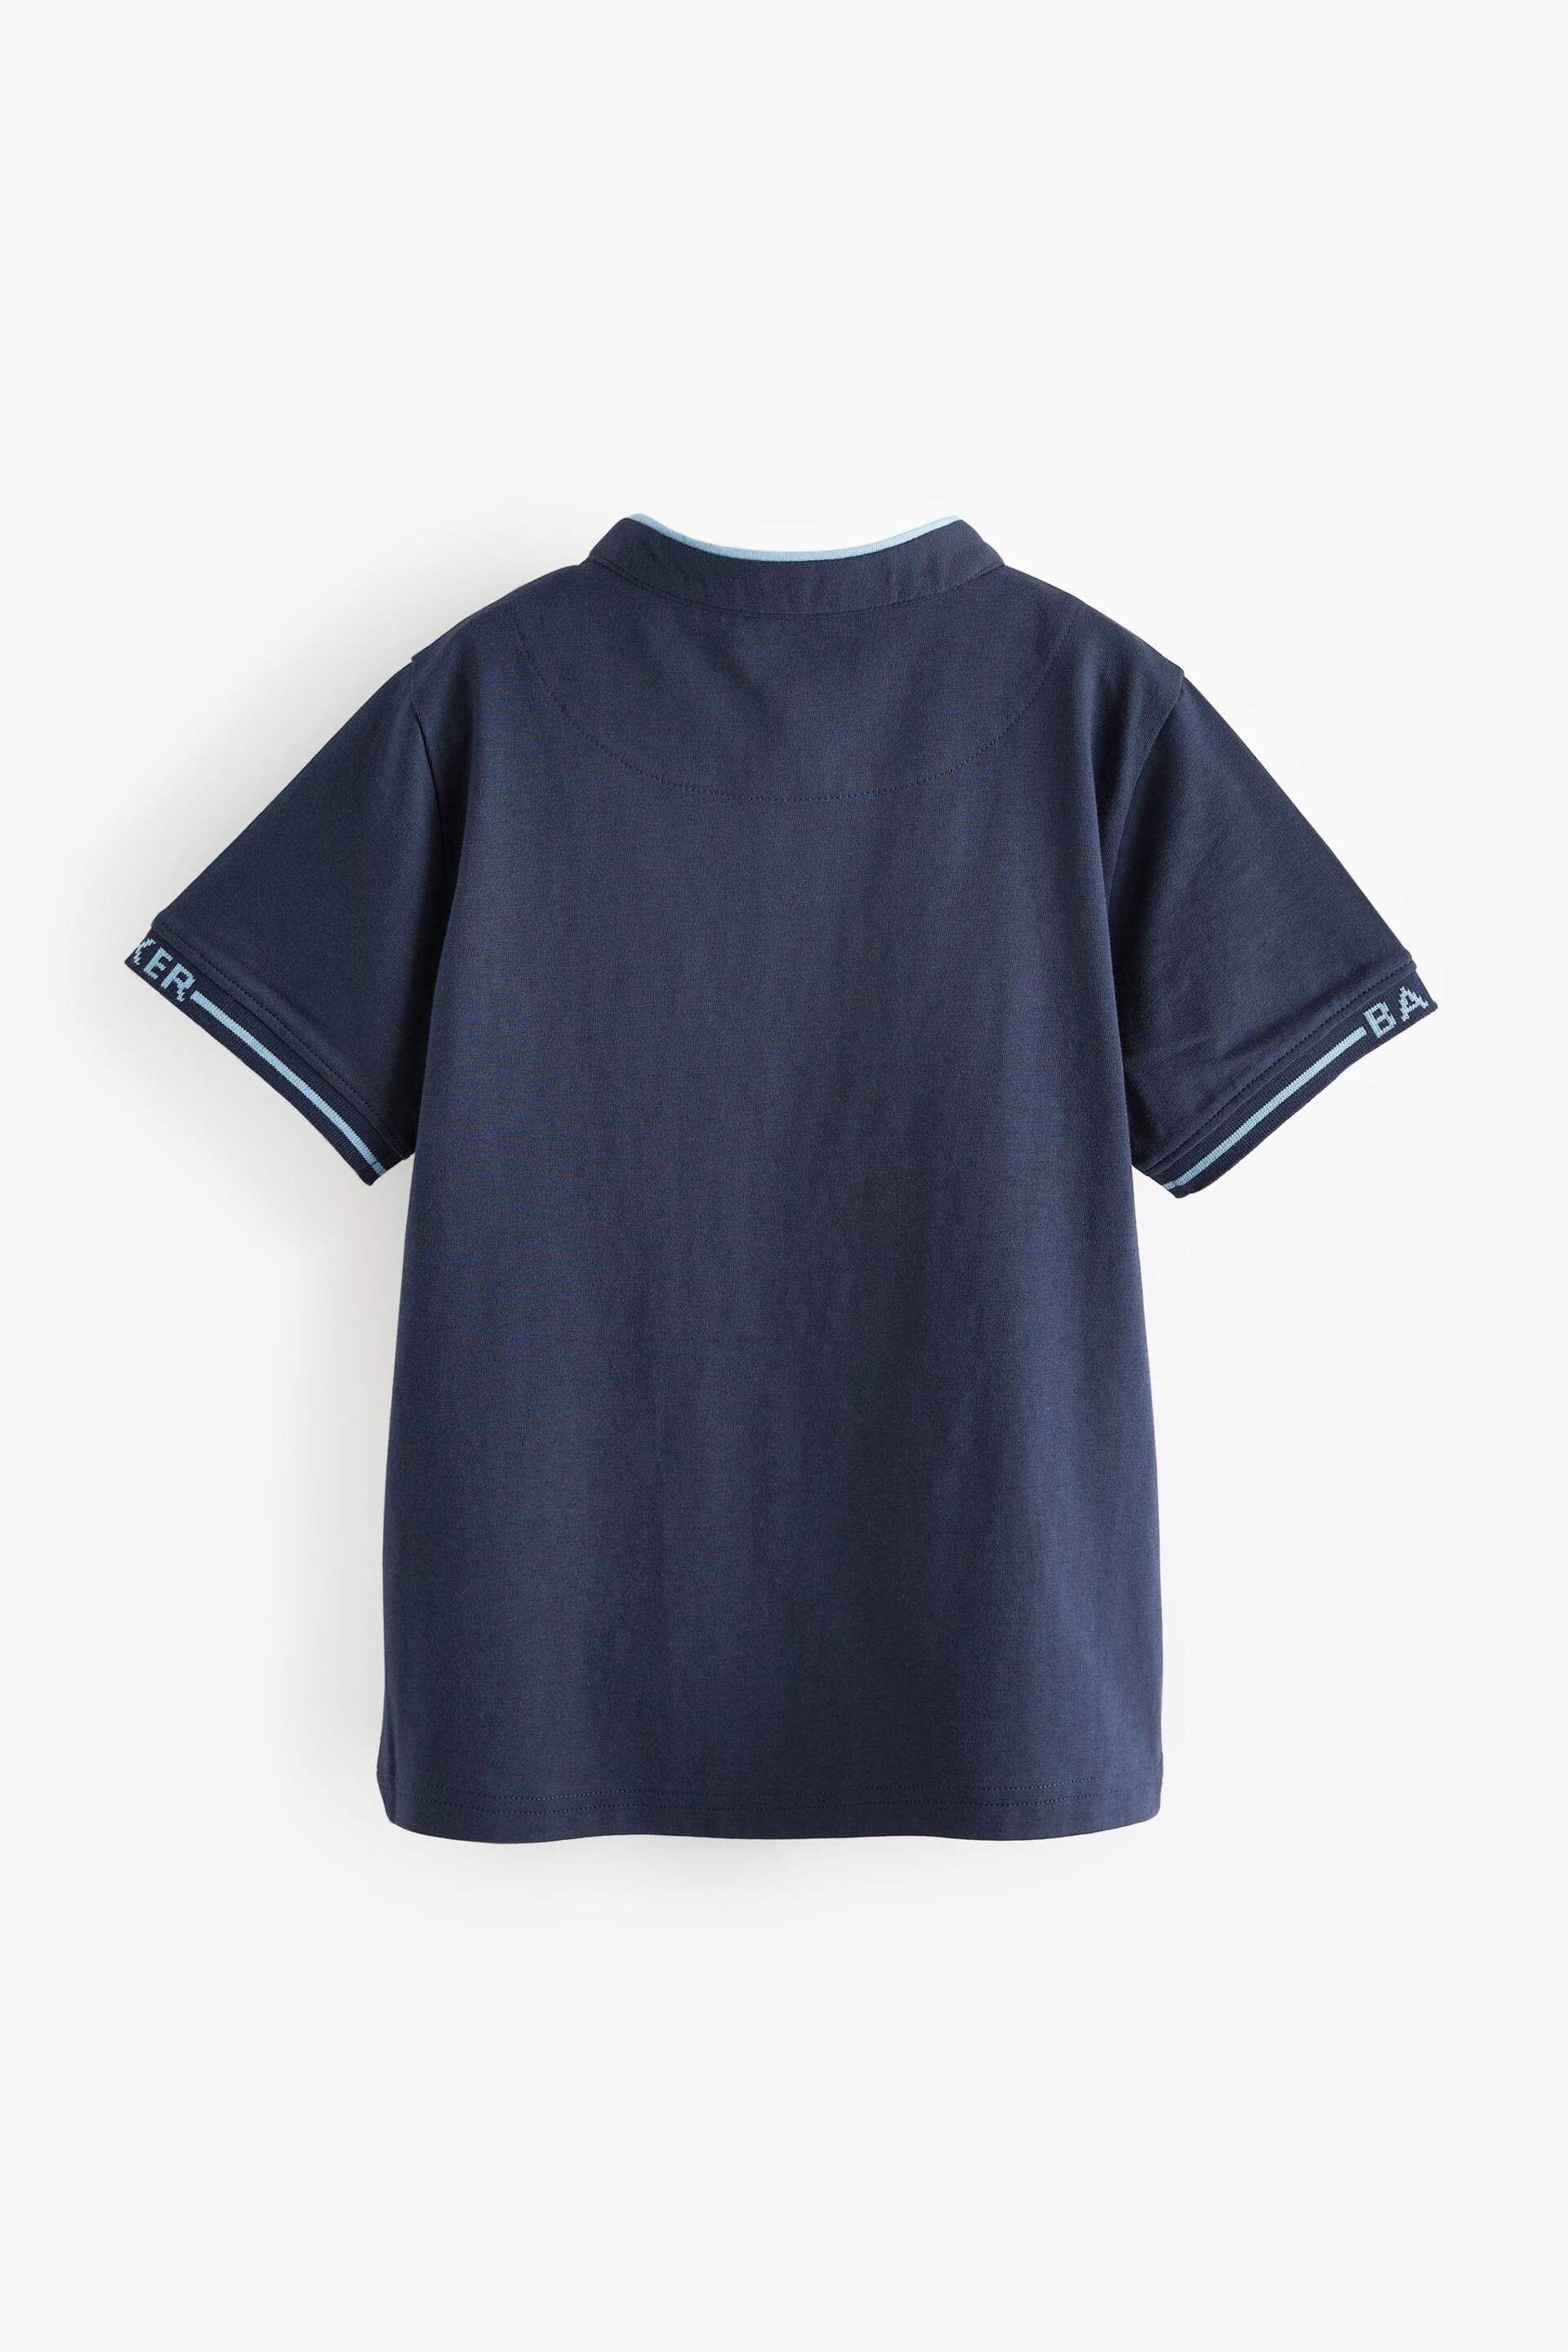 Baker by Ted Baker Henley T-Shirt - Image 11 of 12